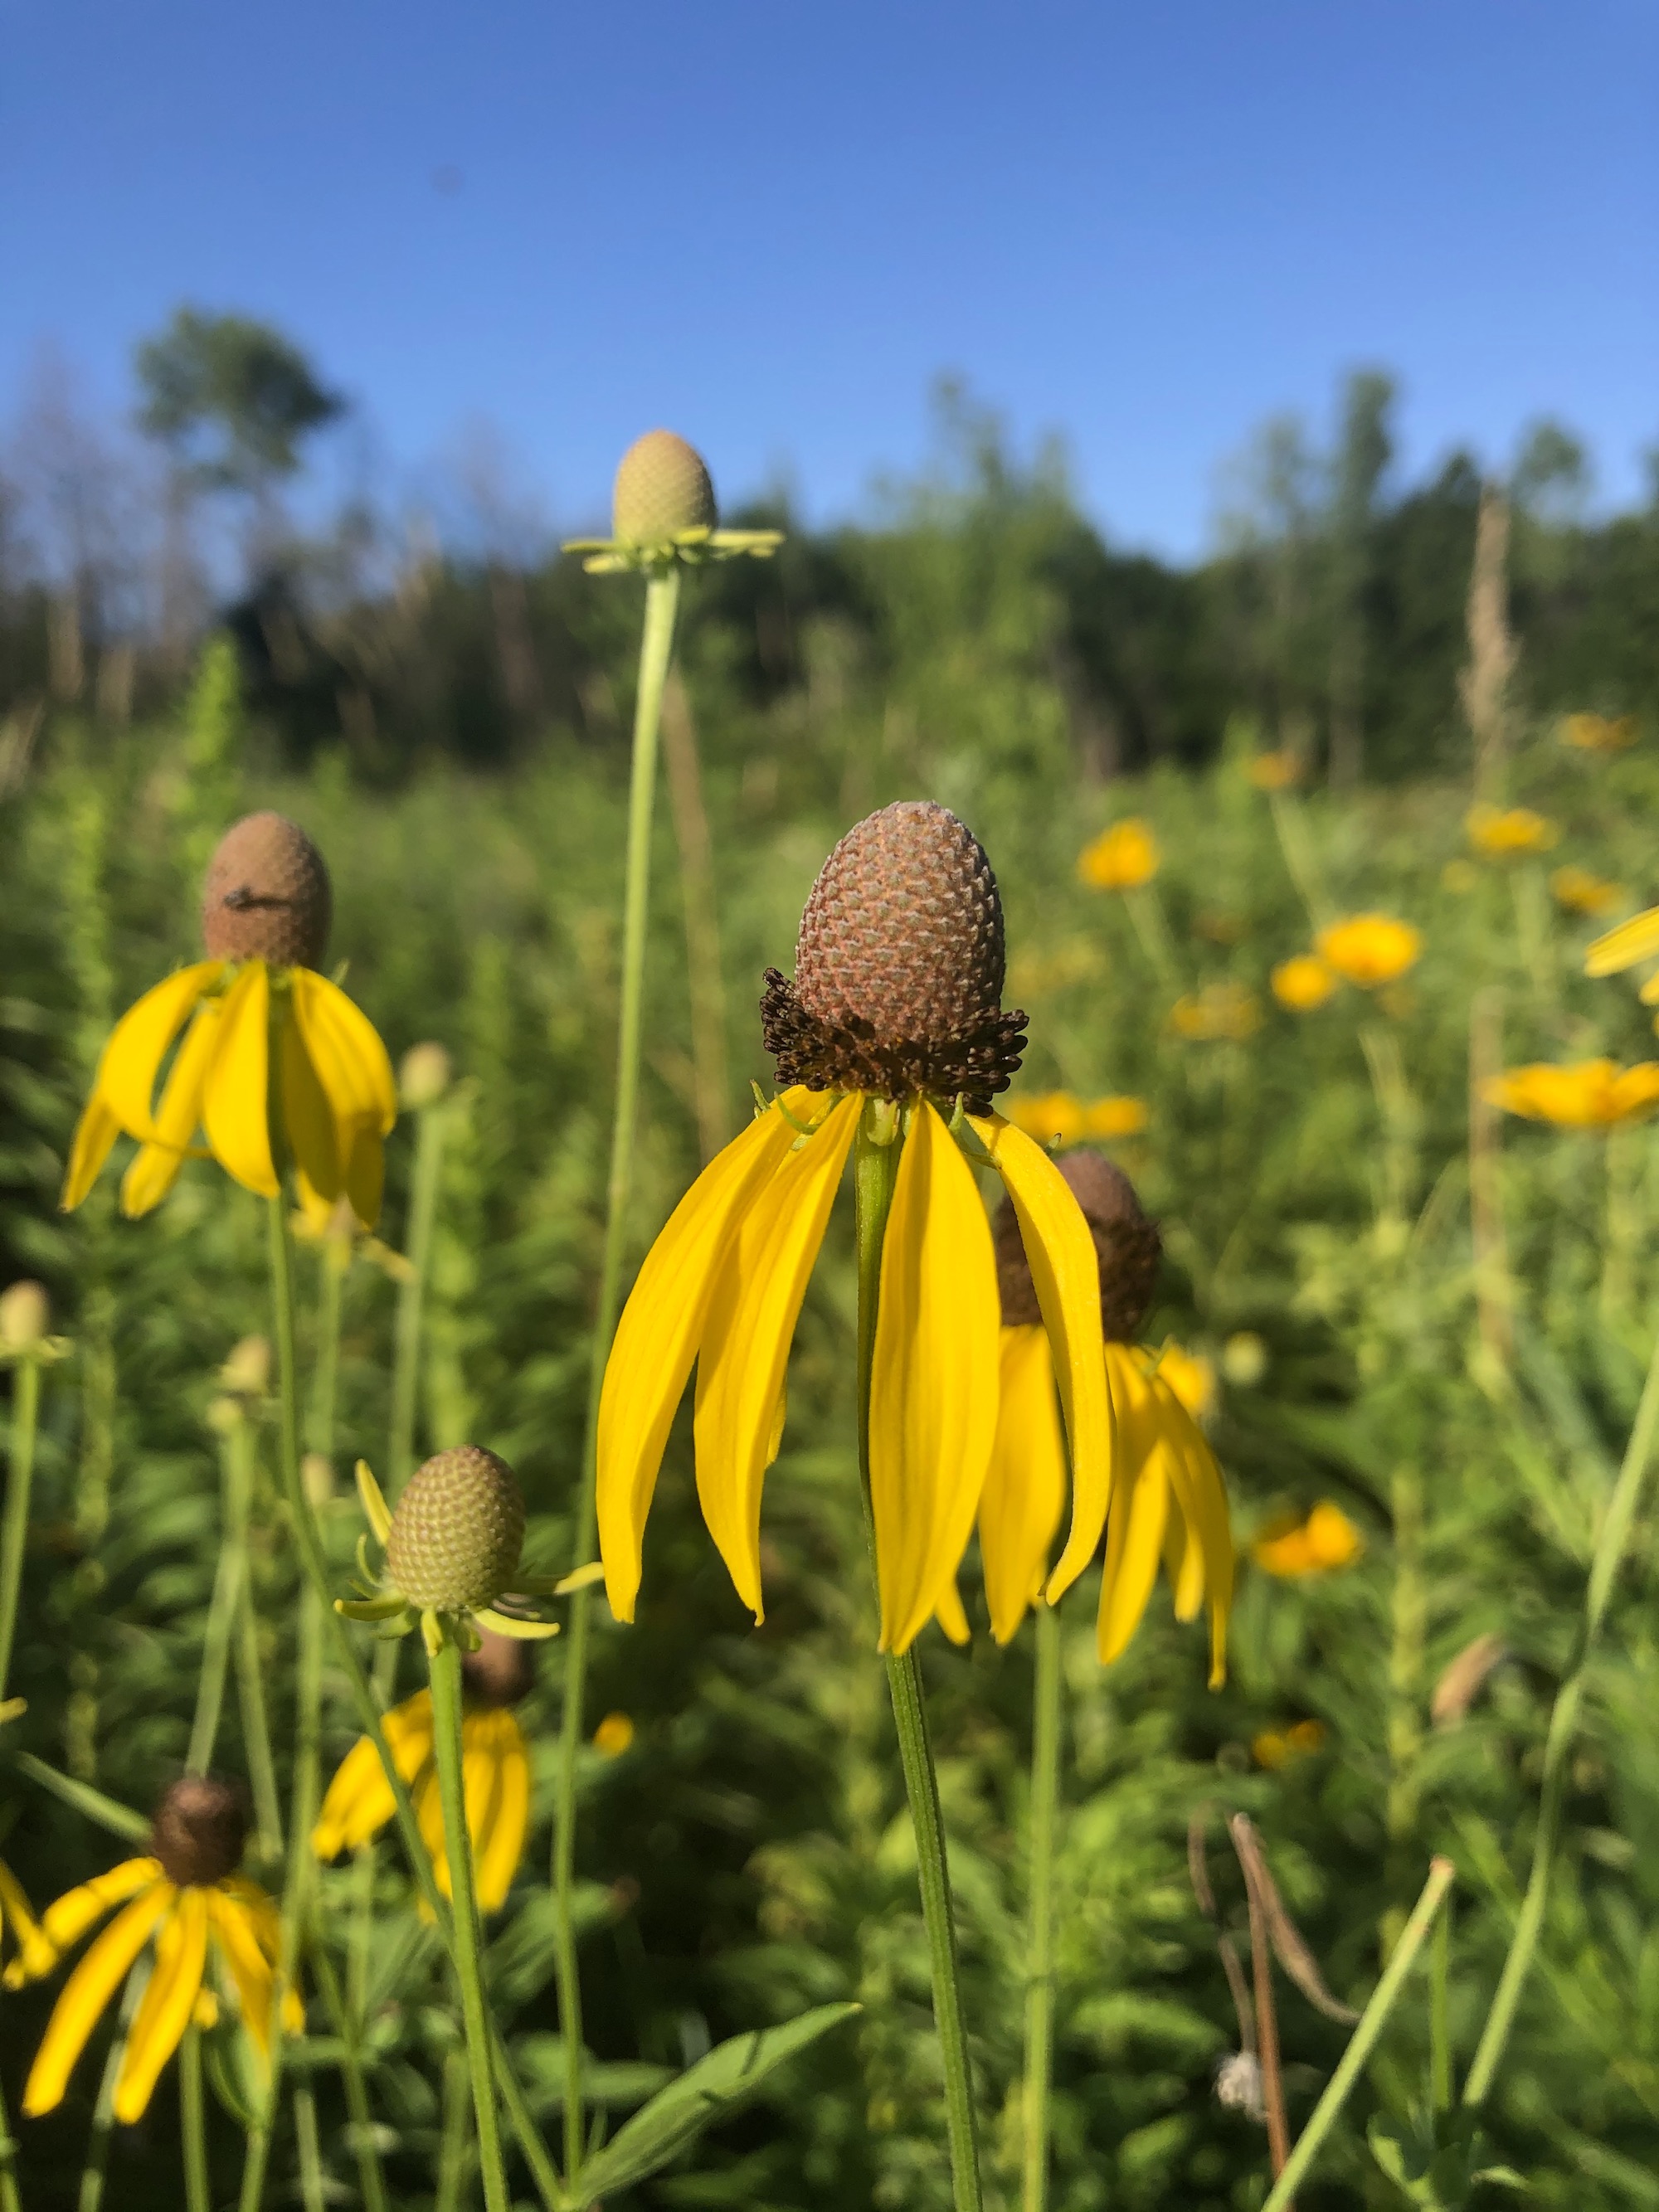 Gray-headed coneflower on shore of Marion Dunn Pond in Madison, Wisconsin on July 20, 2020.